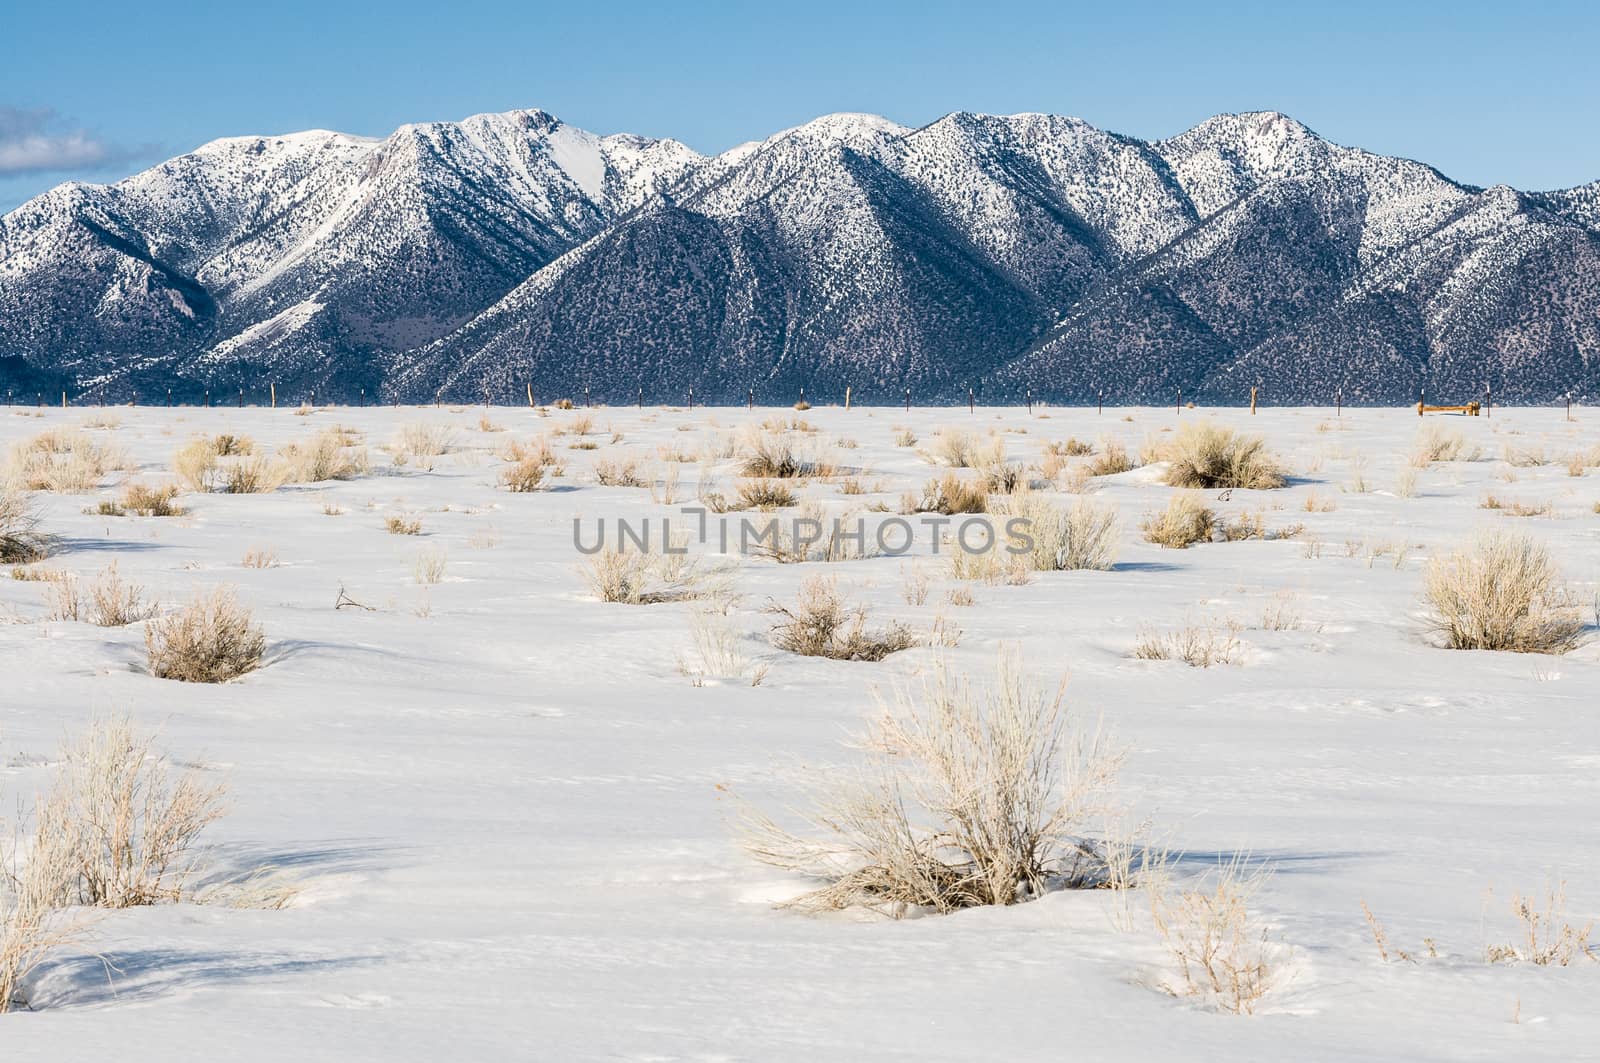 Snow covered ground with snow-capped mountains in background, California